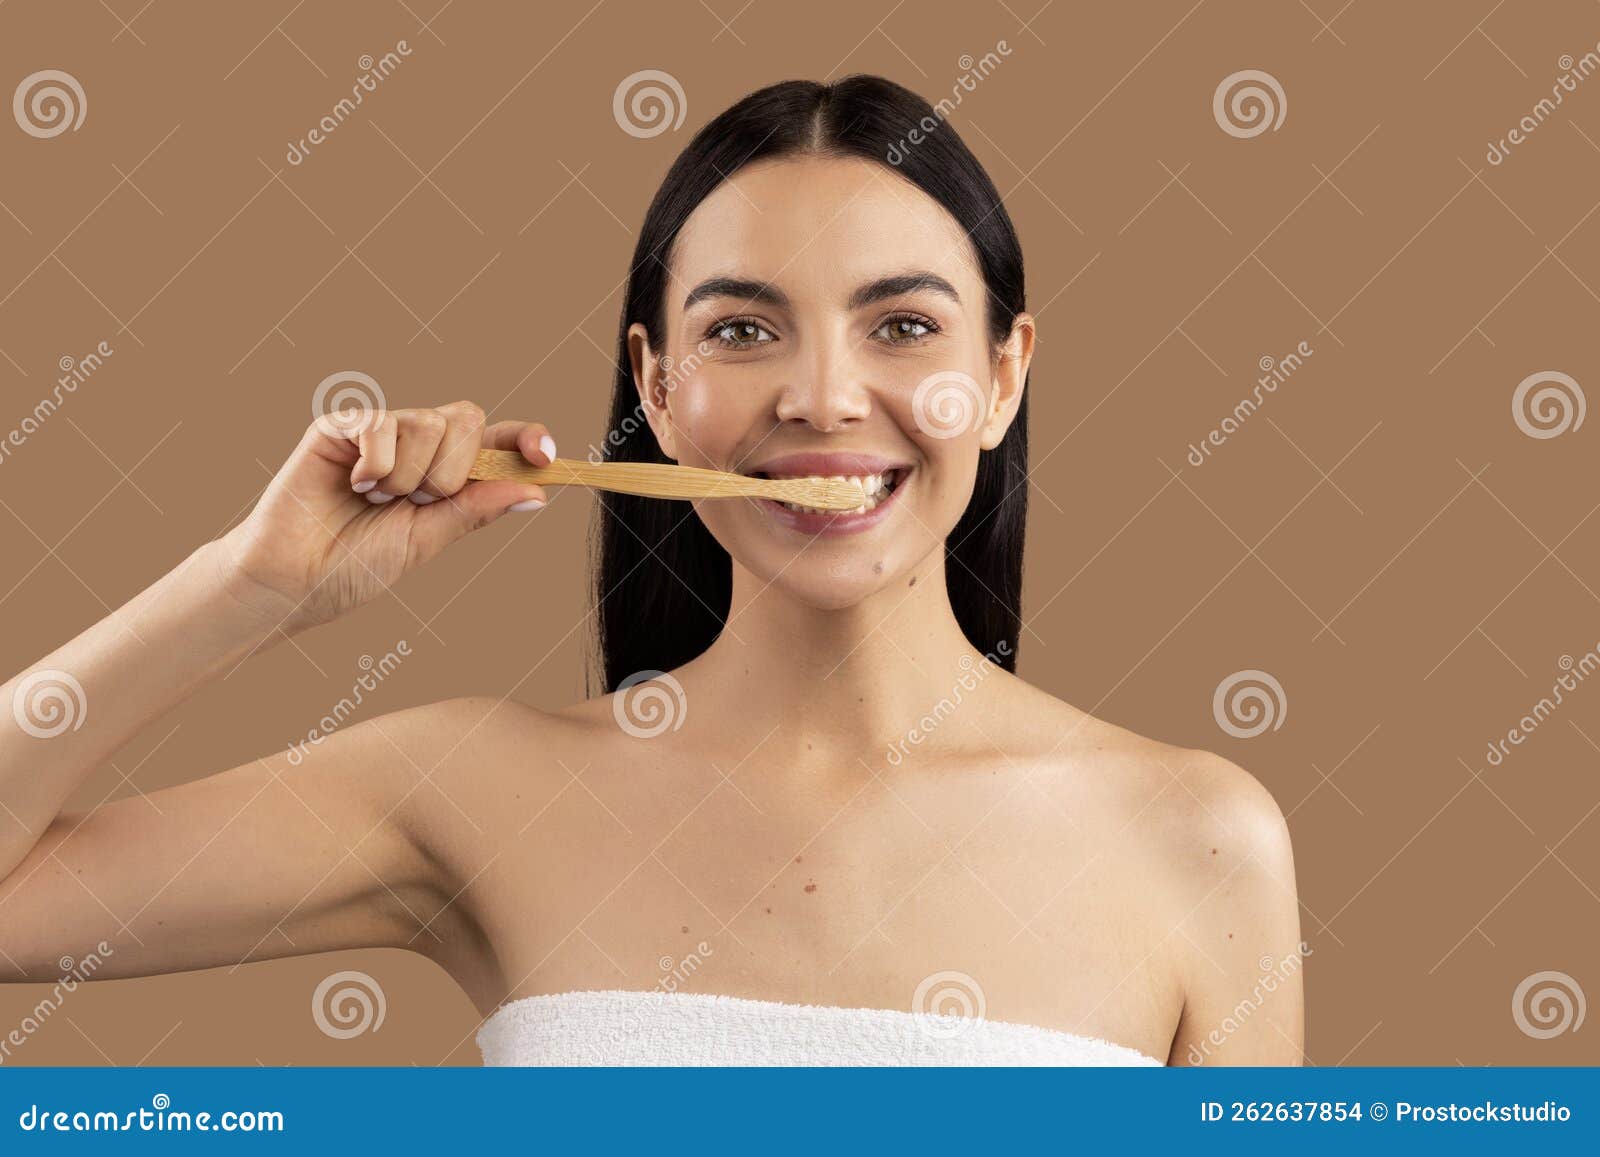 Portrait Of Attractive Cheerful Naked Woman Brushing Her Teeth Stock